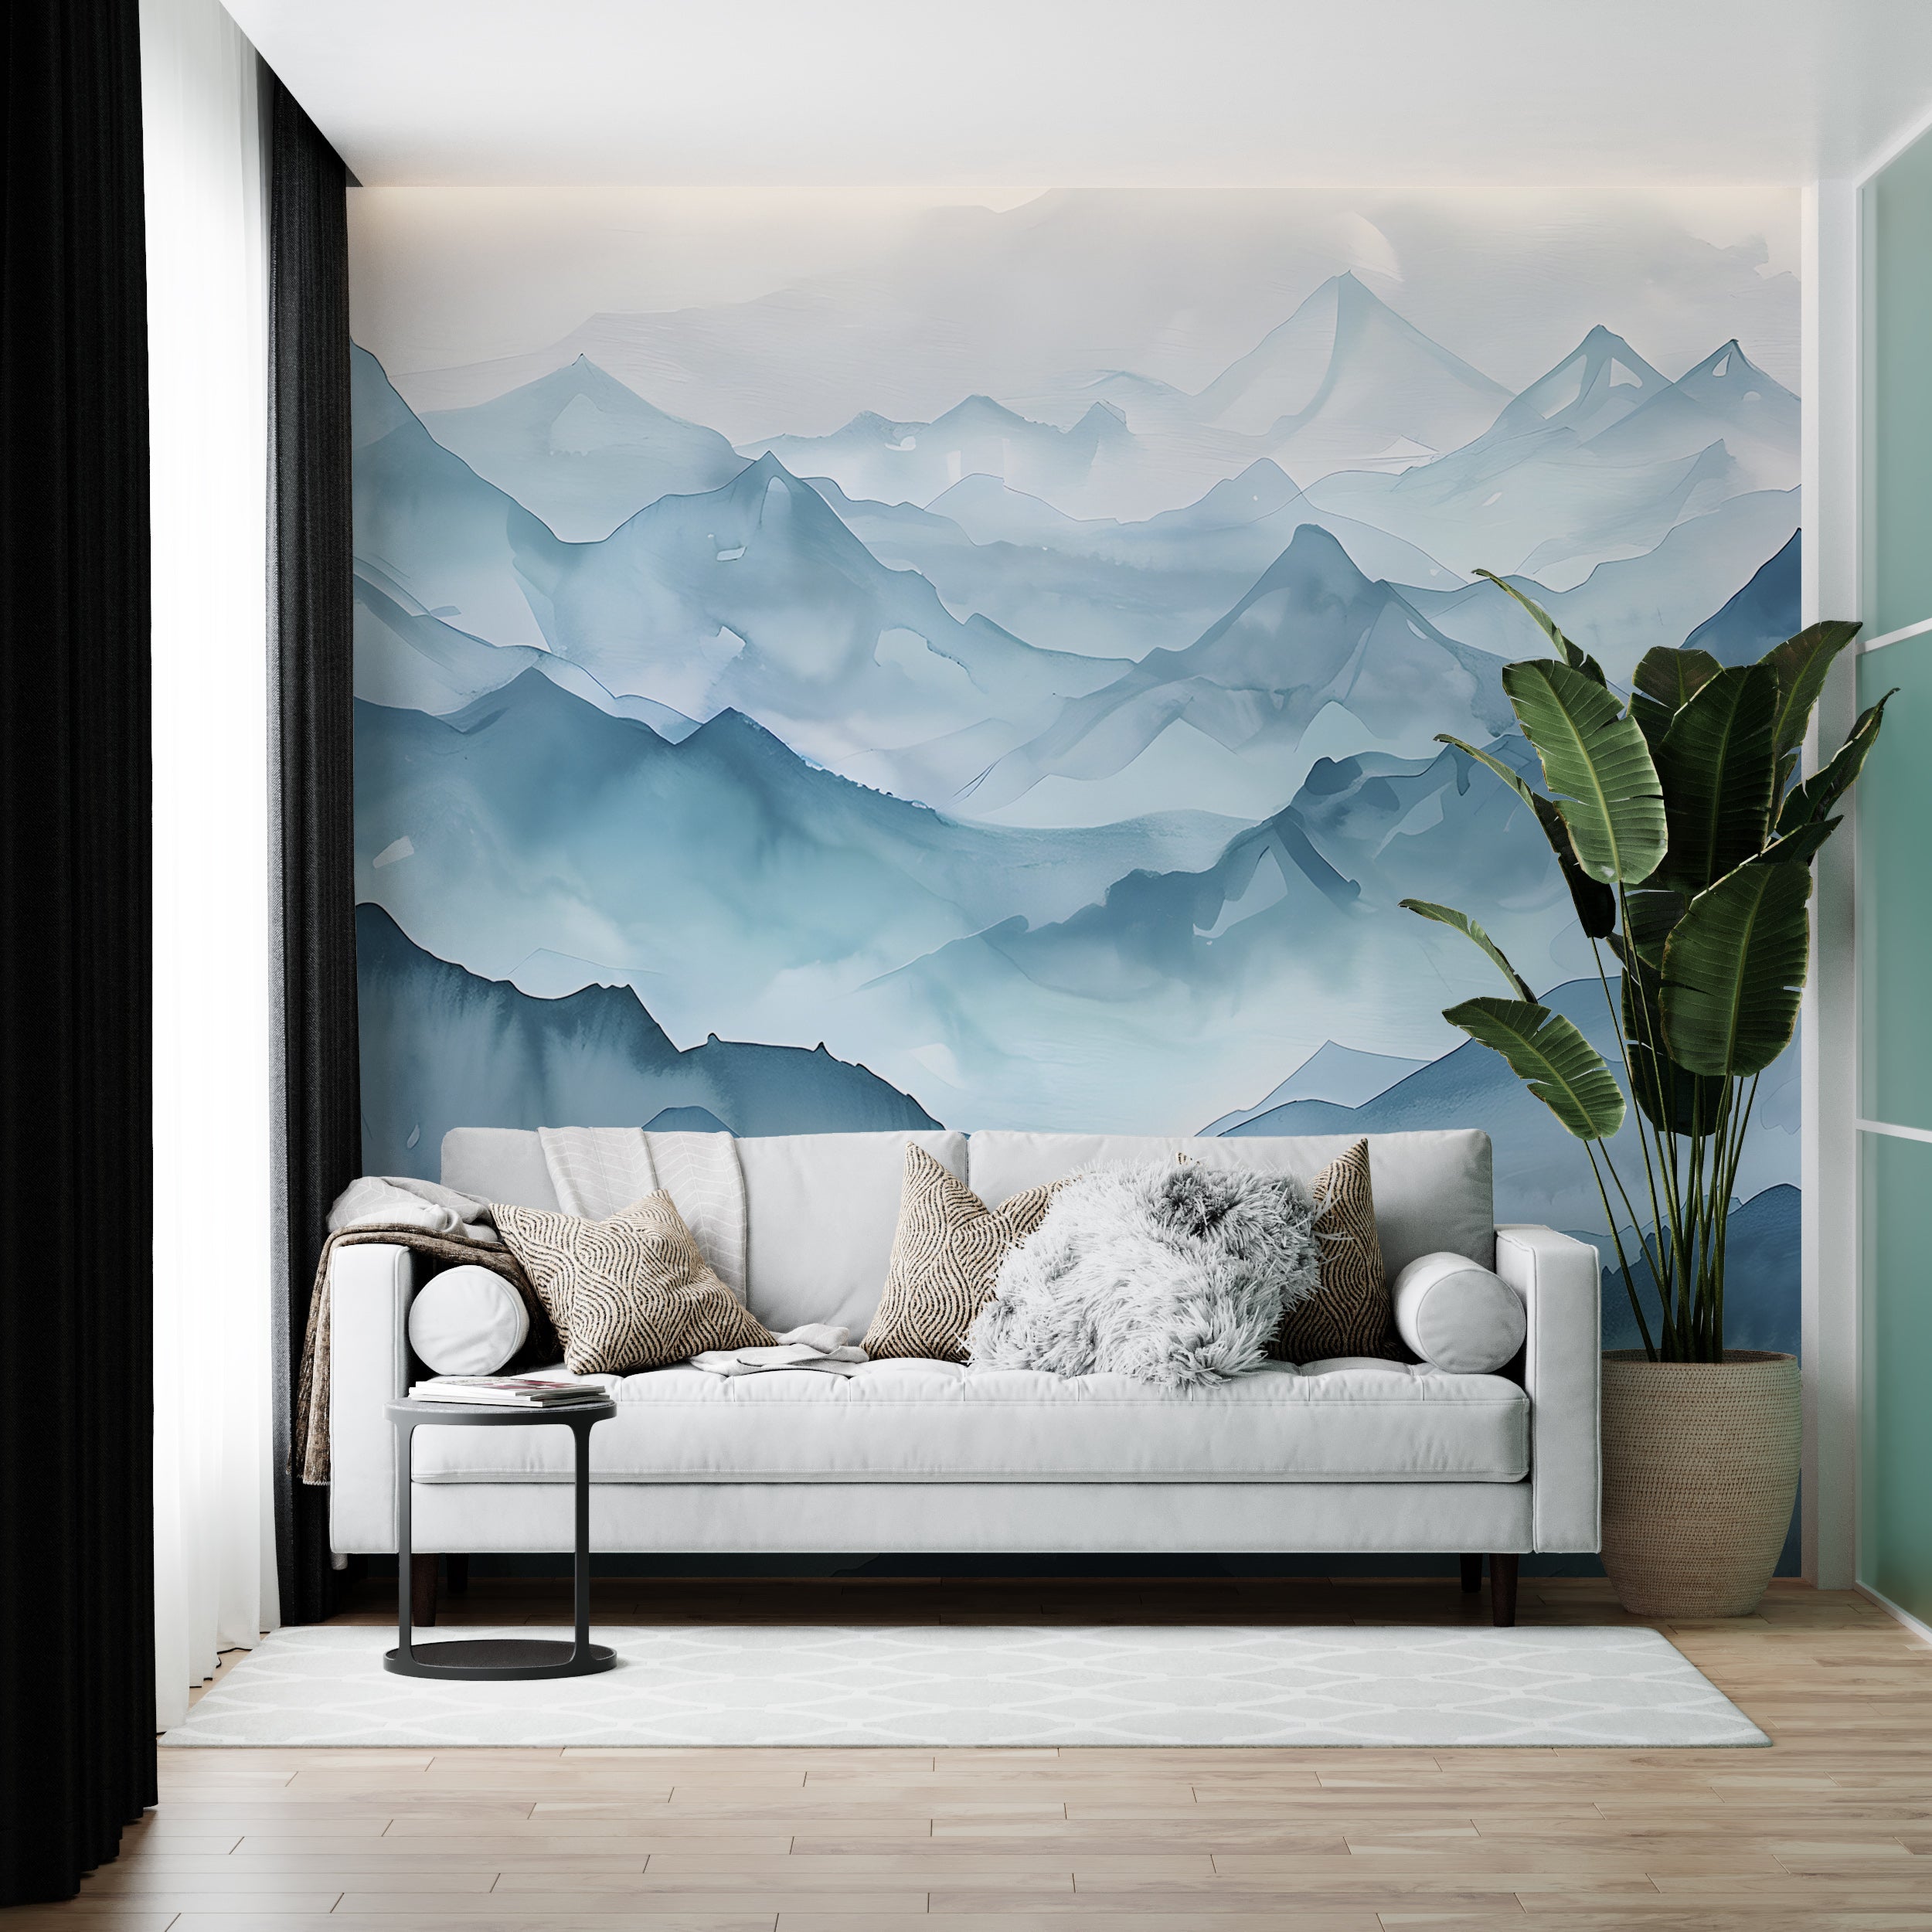 Abstract Blue Mountains Mural, Peel and Stick Foggy Mountain Wallpaper, Watercolor Misty Landscape Art, Nursery Blue Nature Decal